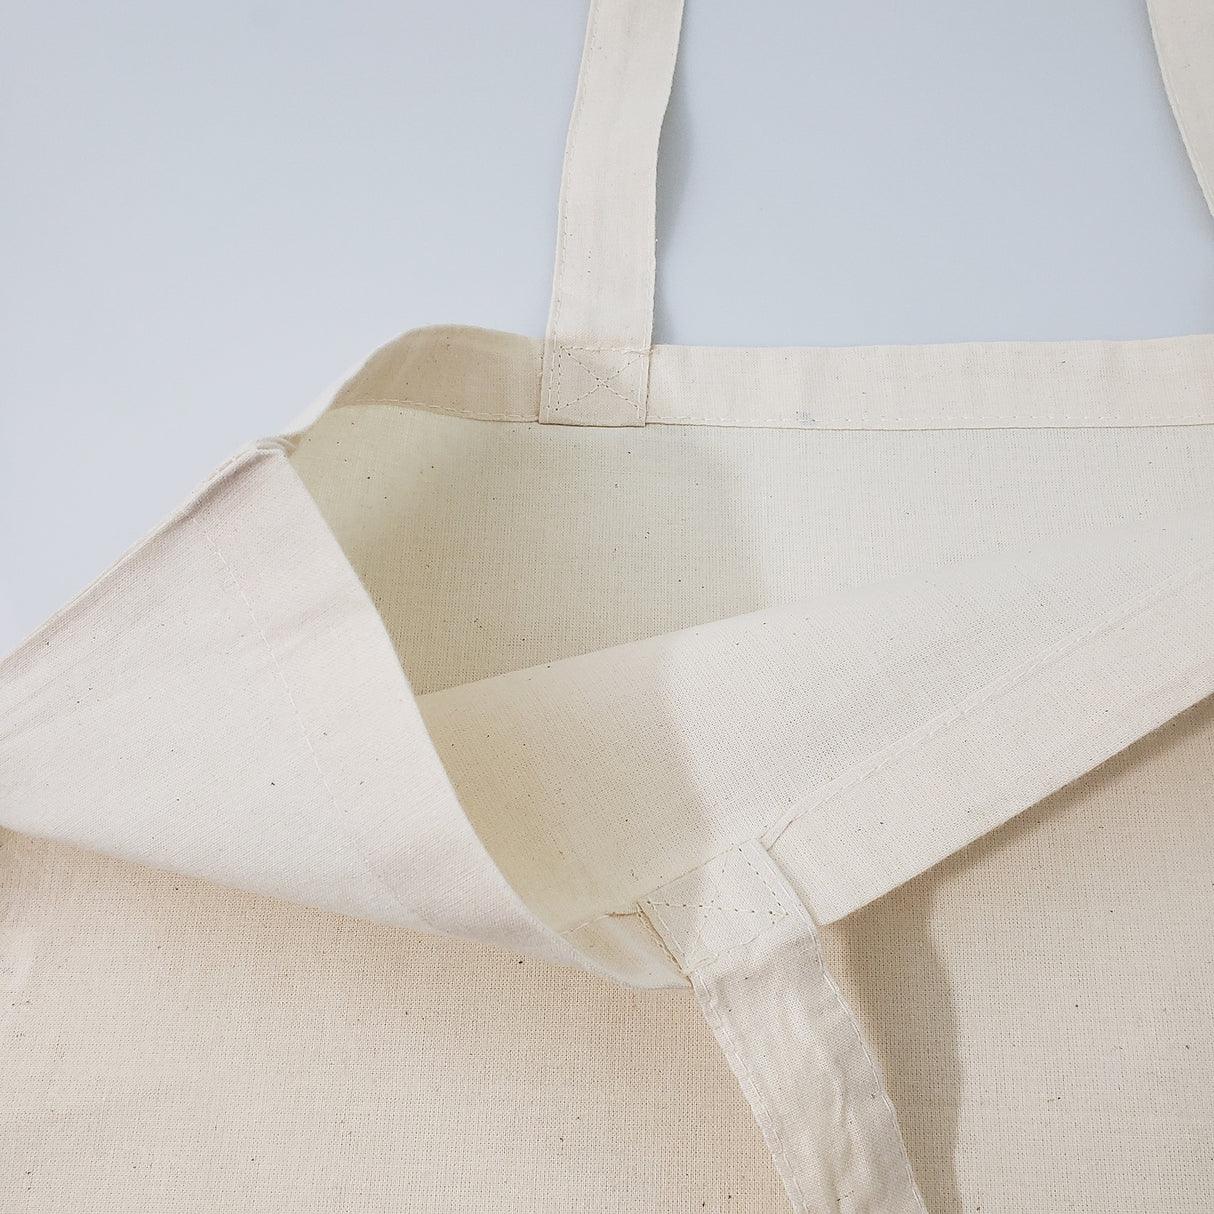 12 ct Large Organic Cotton Grocery Tote Bags - By Dozen